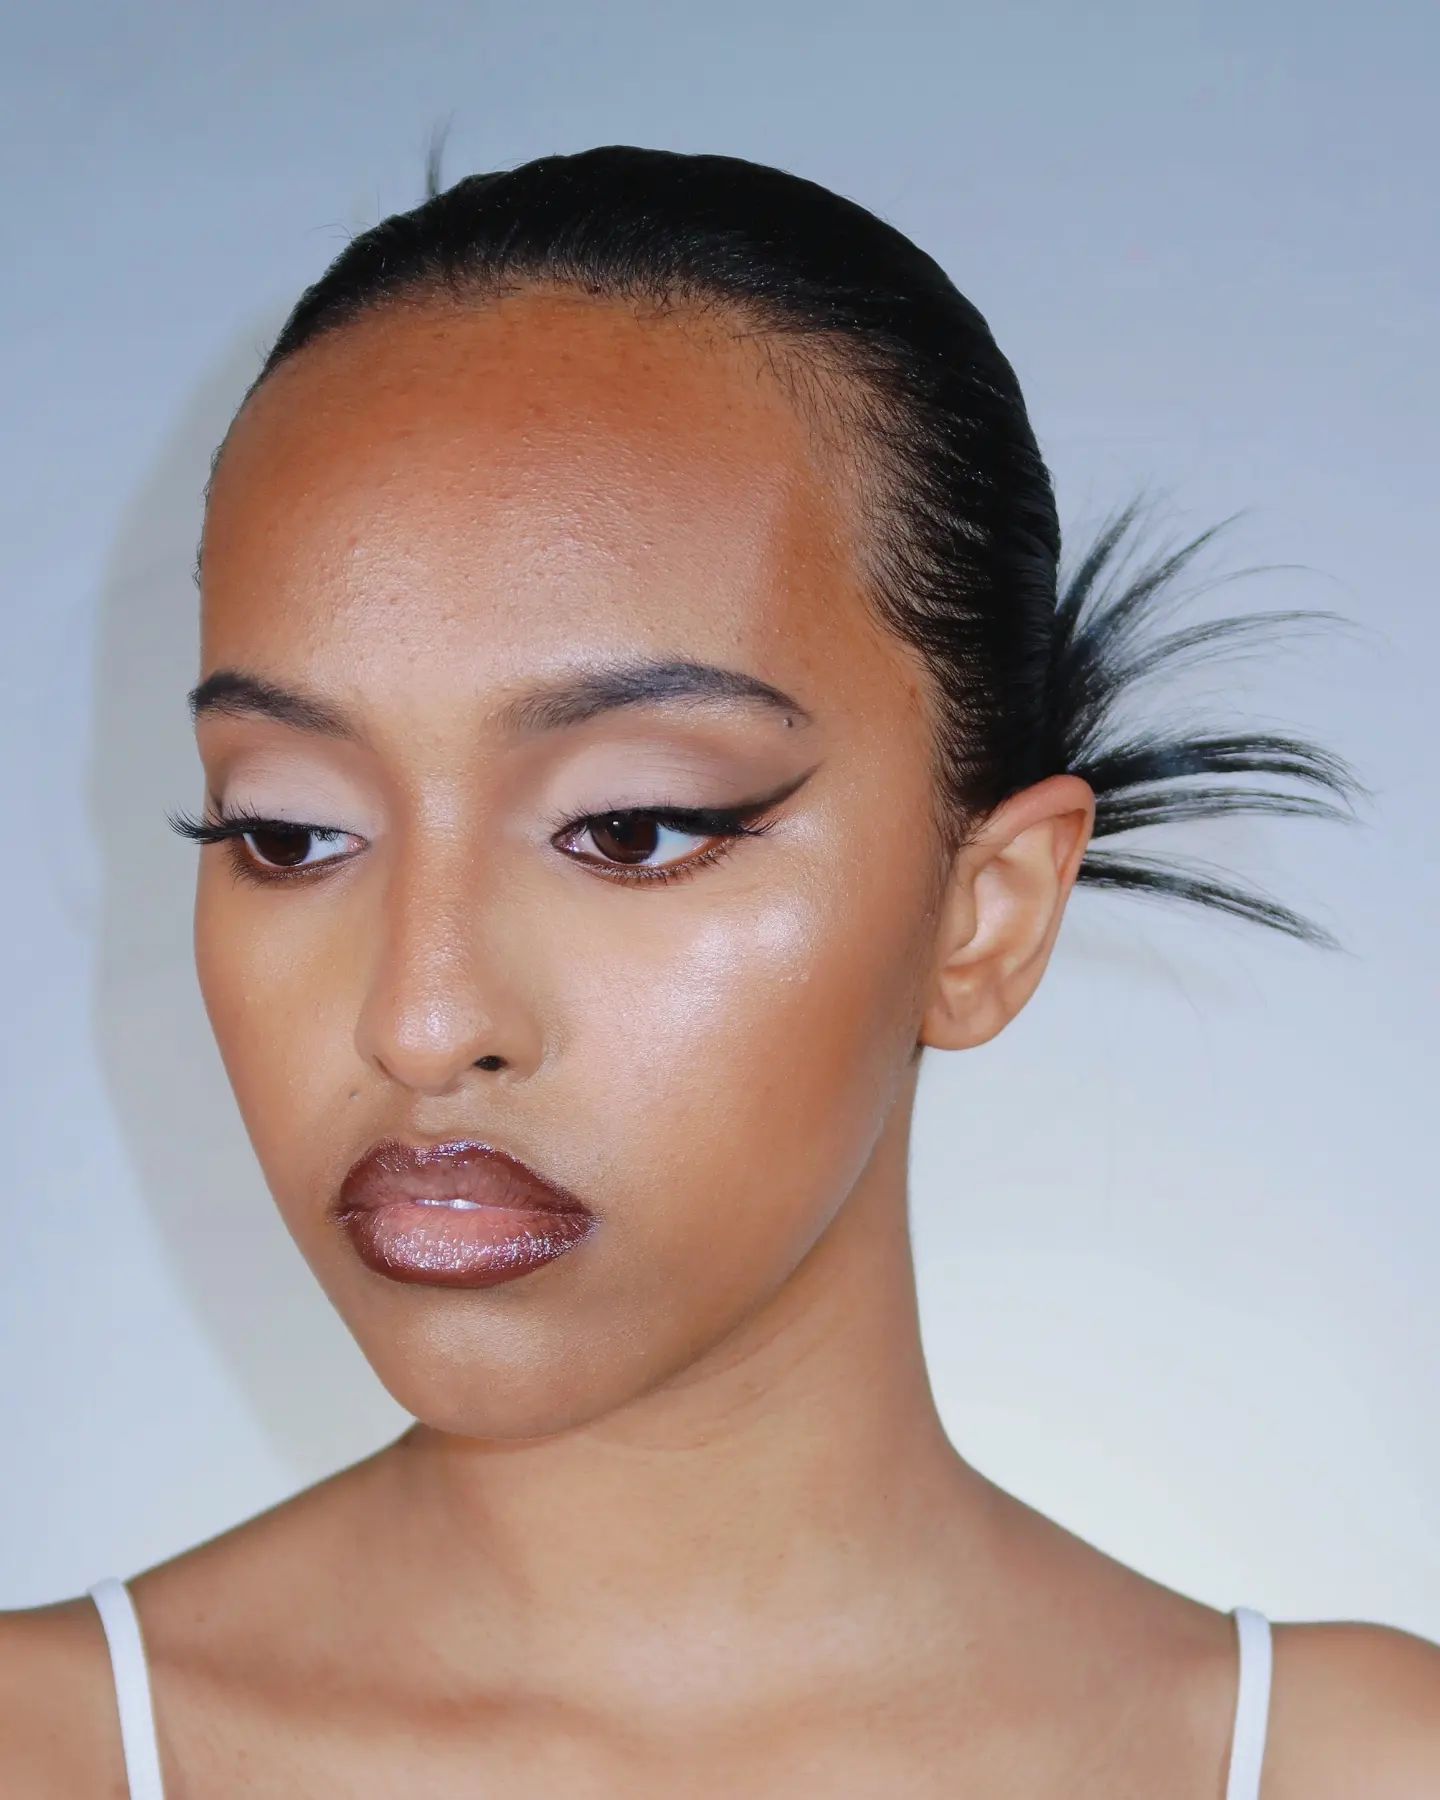 Stunning, Bold, and Mysterious: How to Nail the Unapproachable Glamorous Makeup Look